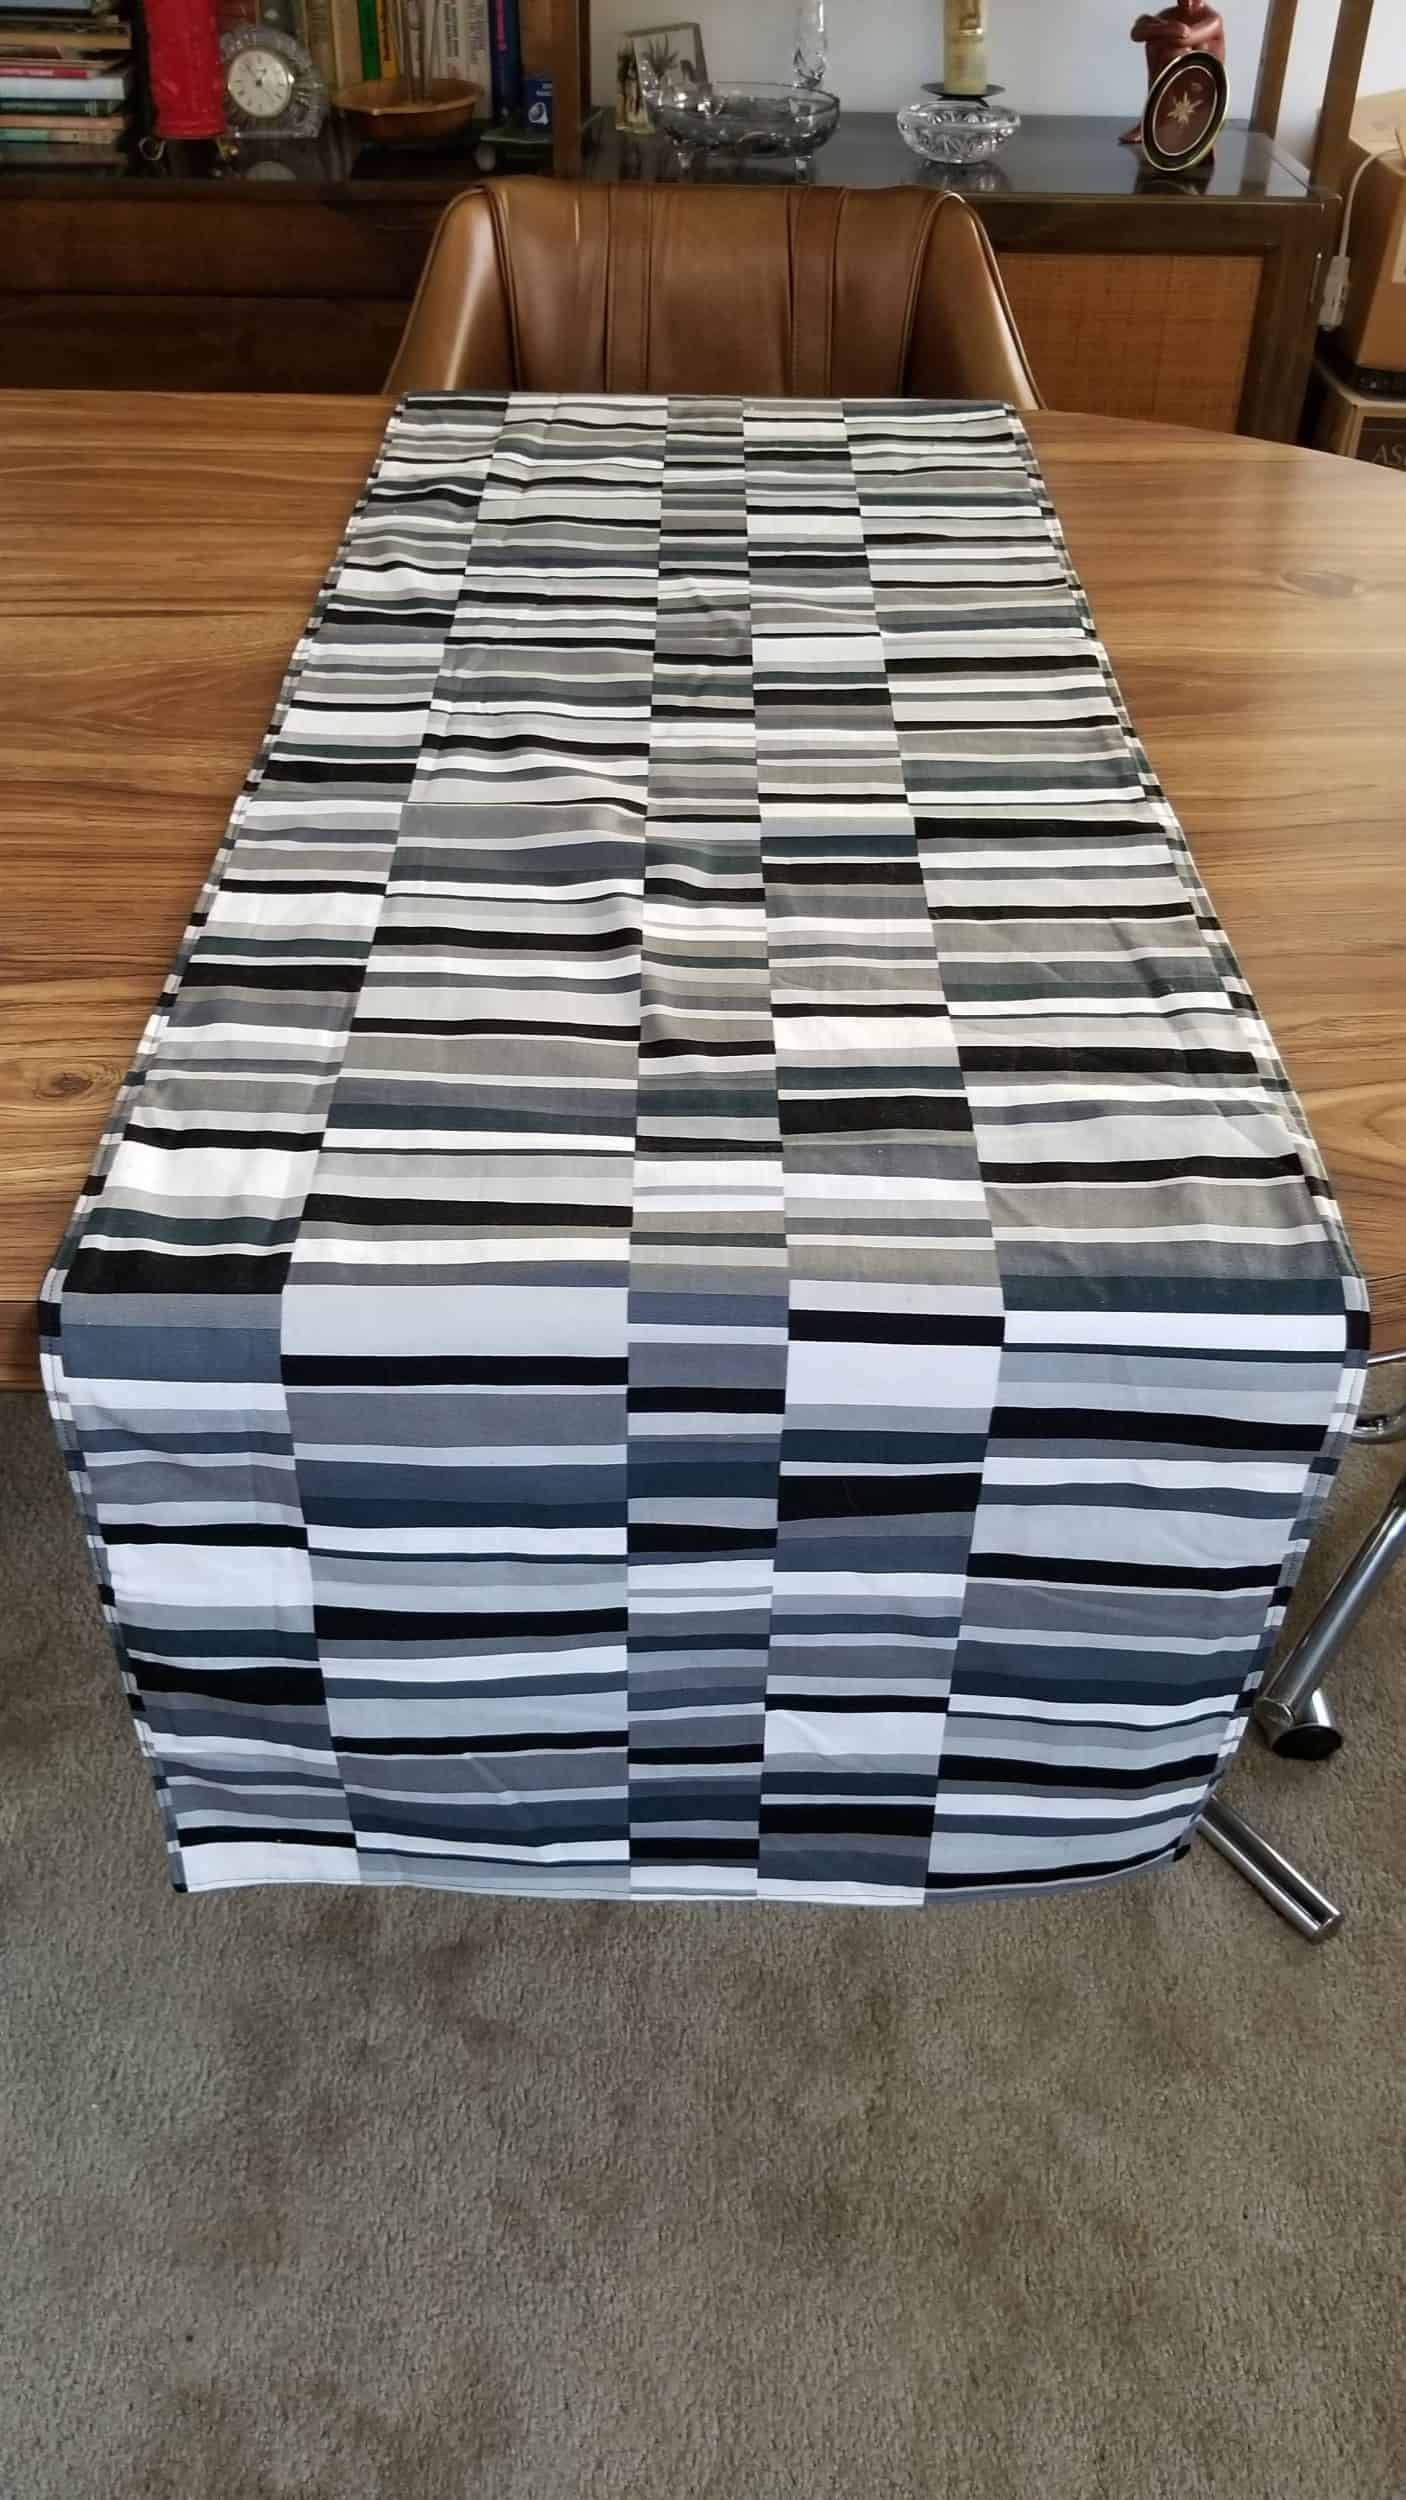 This Shades of Gray/Coffee Reversible Runner is made with love by The Creative Soul Sisters! Shop more unique gift ideas today with Spots Initiatives, the best way to support creators.